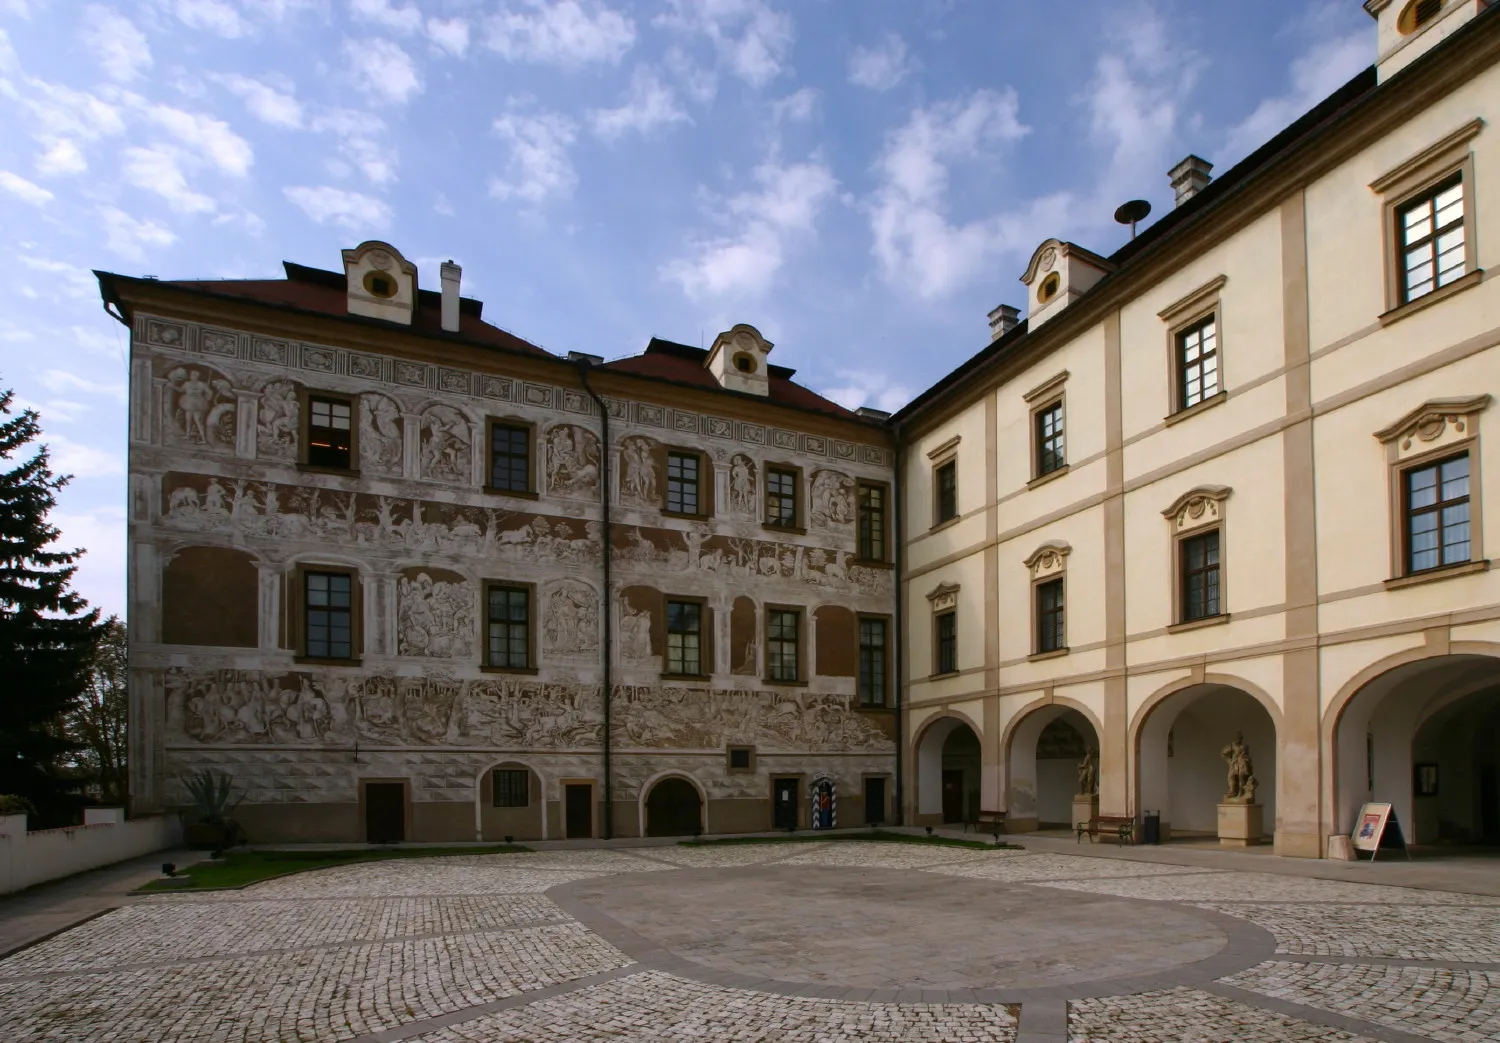 Photo showing: The castle in Benátky nad Jizerou (Czech Republic), where Tycho Brahe lived from August 1599 to June 1600. In February 1600, Tycho Brahe and Johannes Kepler met here for the first time.